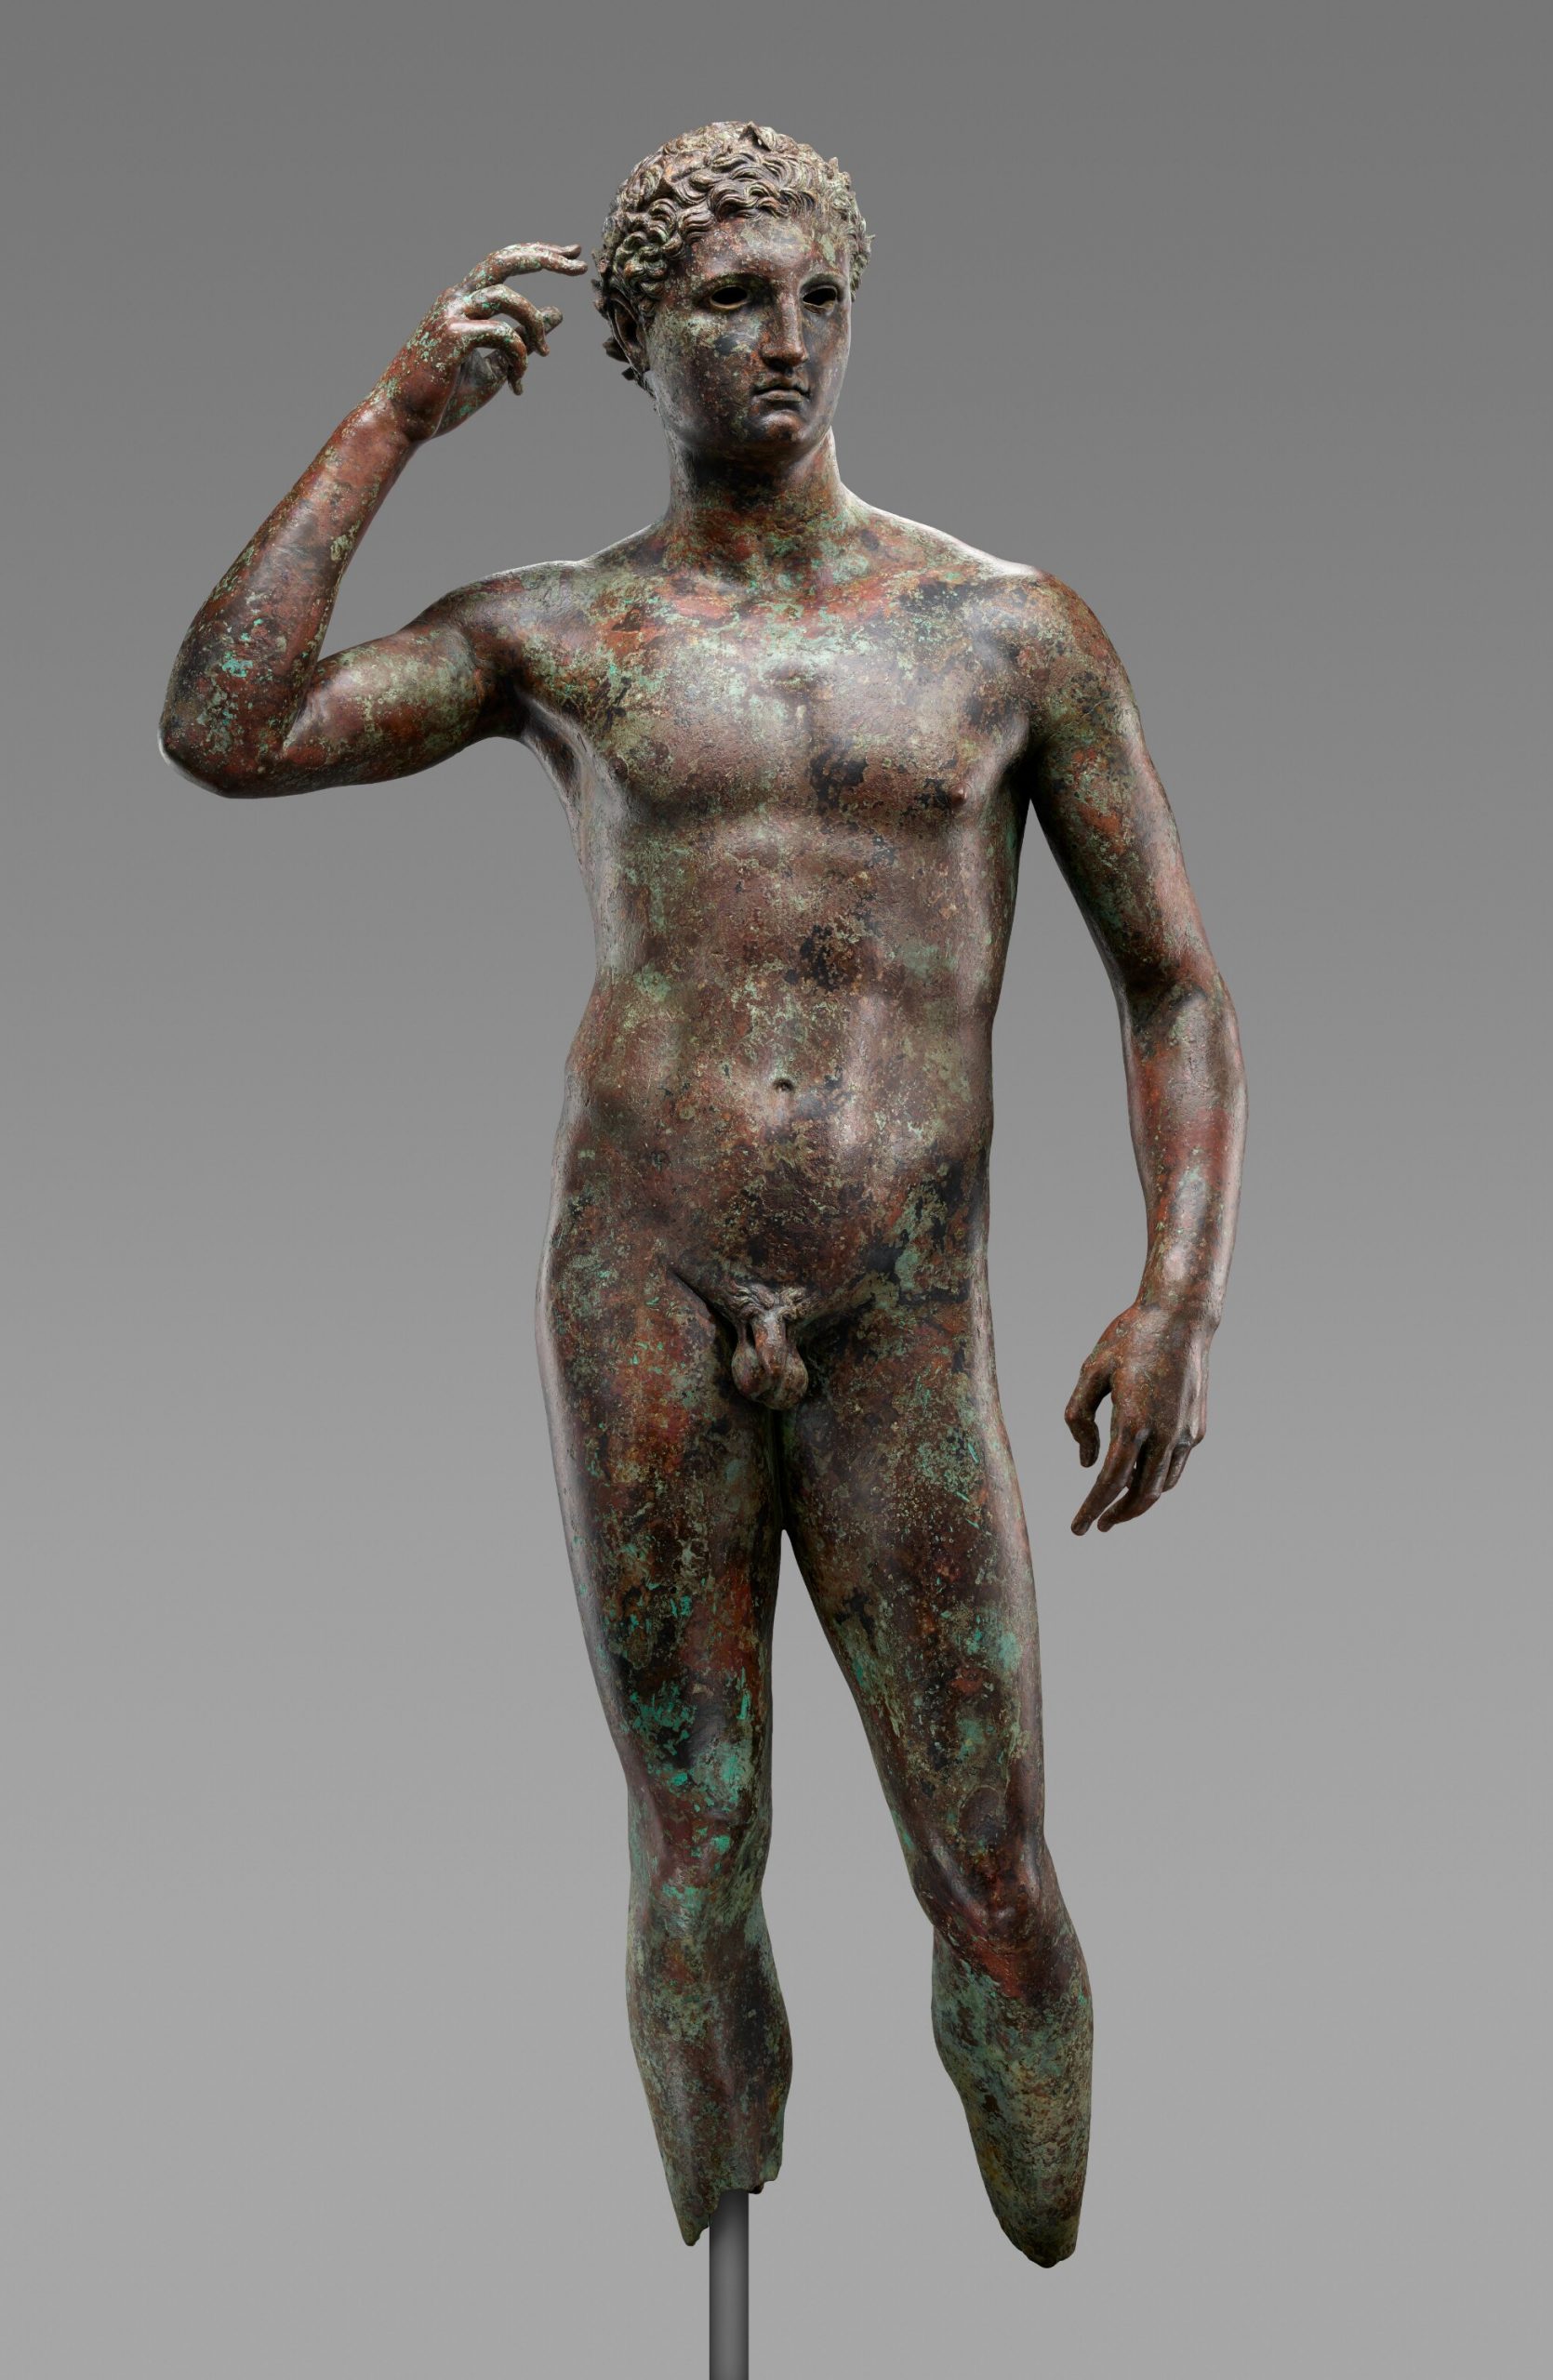 A Court Rules the Getty Museum’s Prized Ancient Greek Statue Belongs to Italy - artnet News